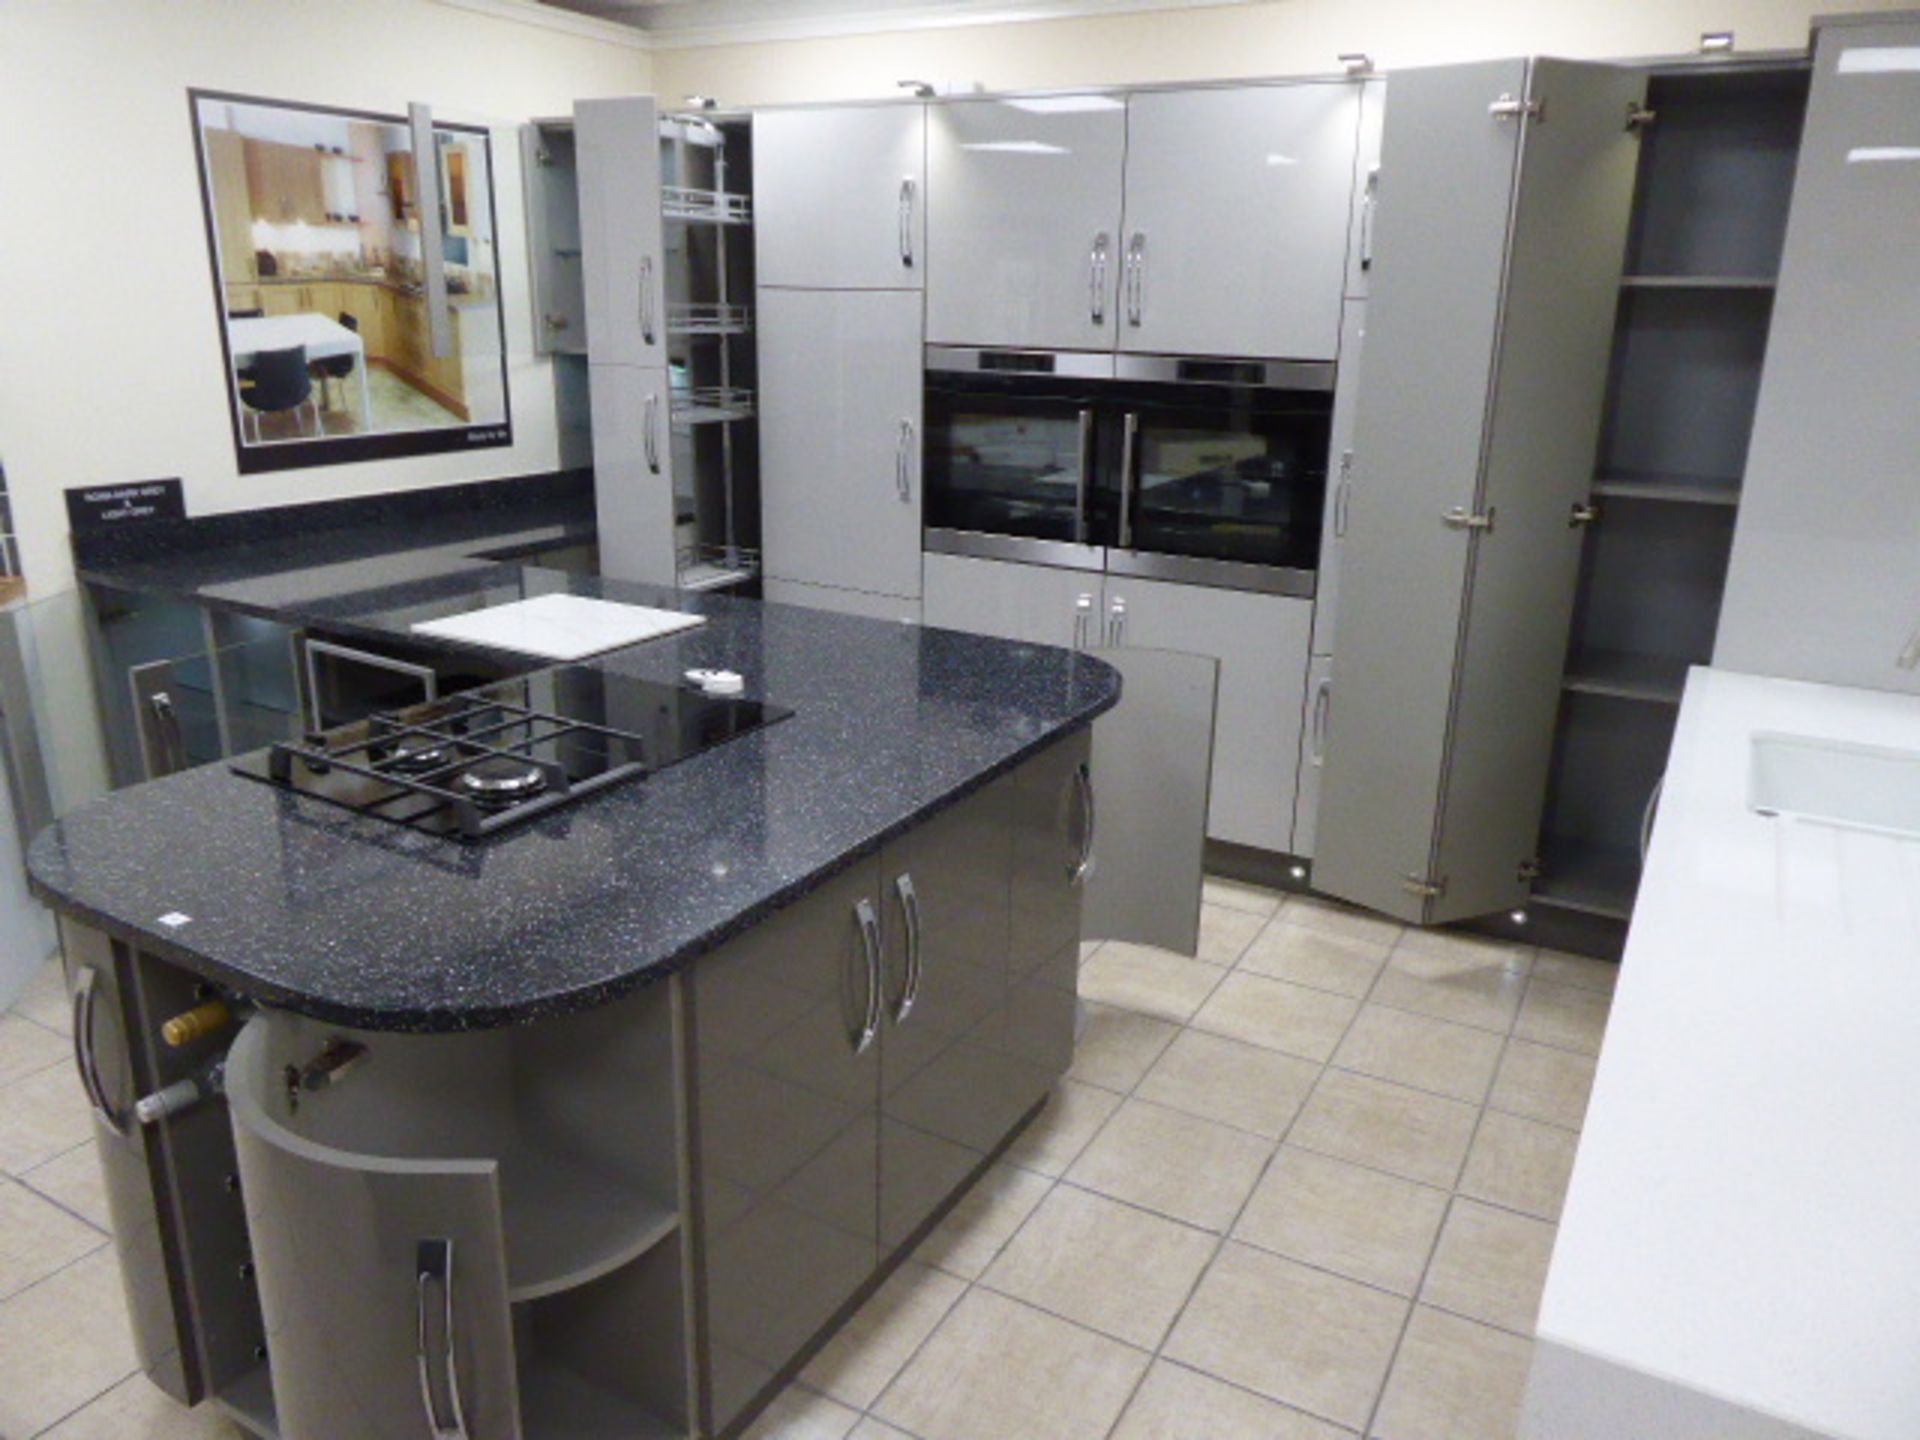 Large Roma dark grey and light grey kitchen with quartz worktops in an L-shape with a breakfast - Image 24 of 33